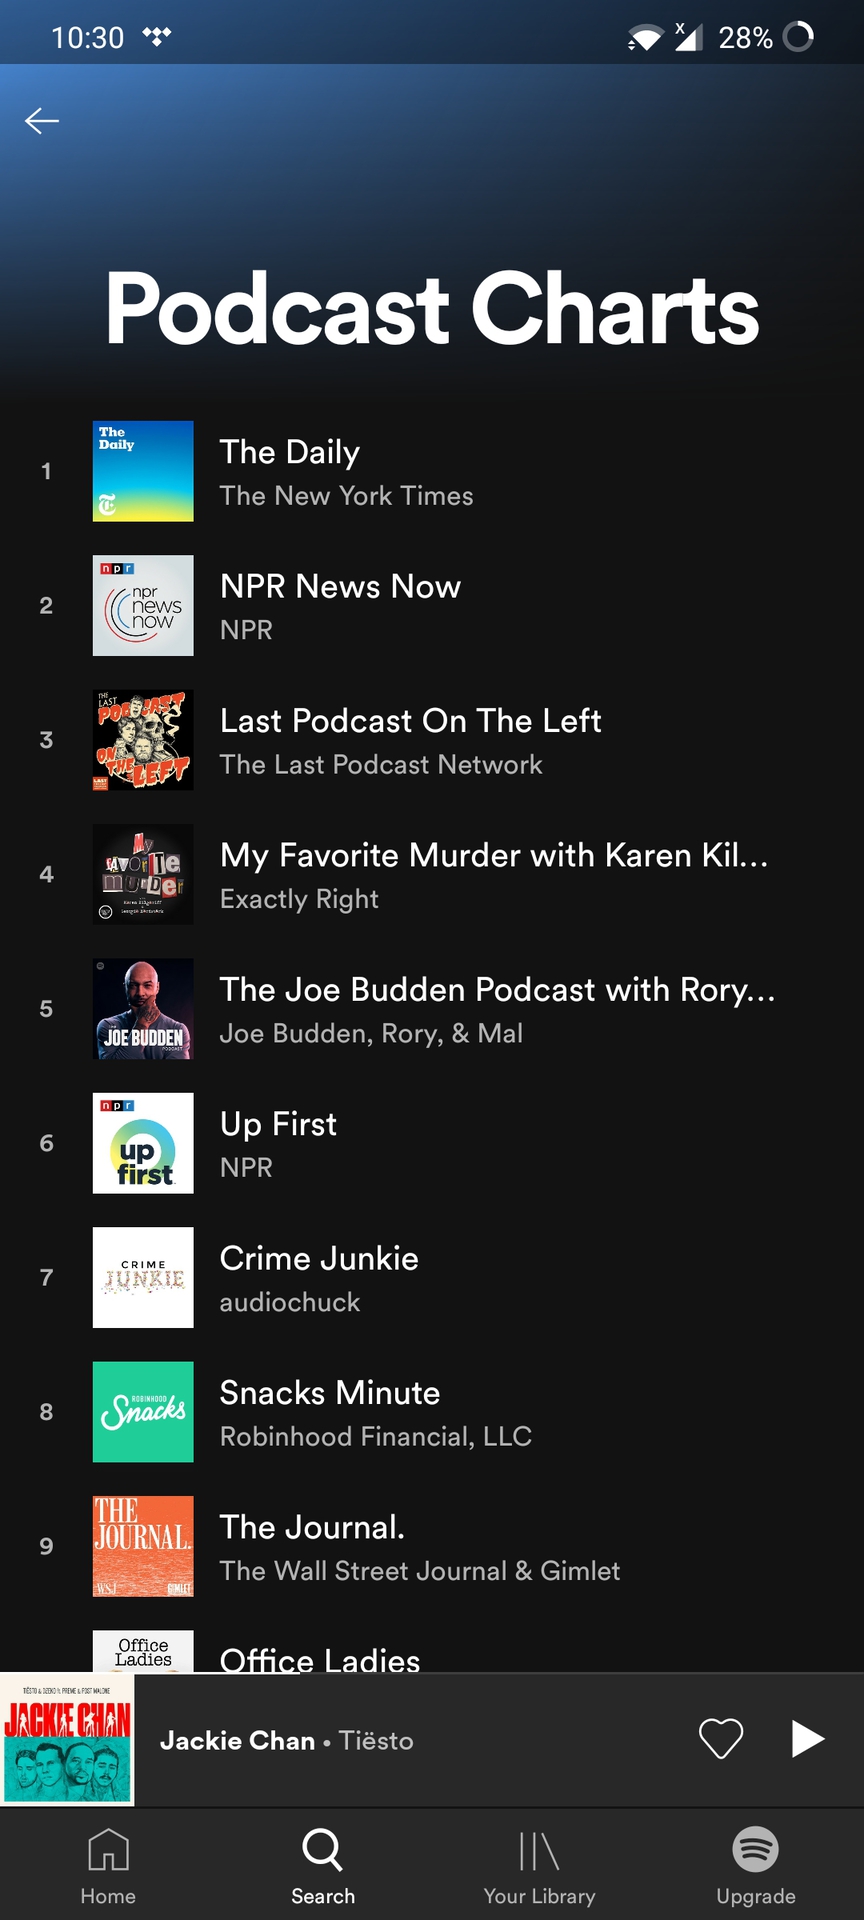 Spotify Podcasts charts